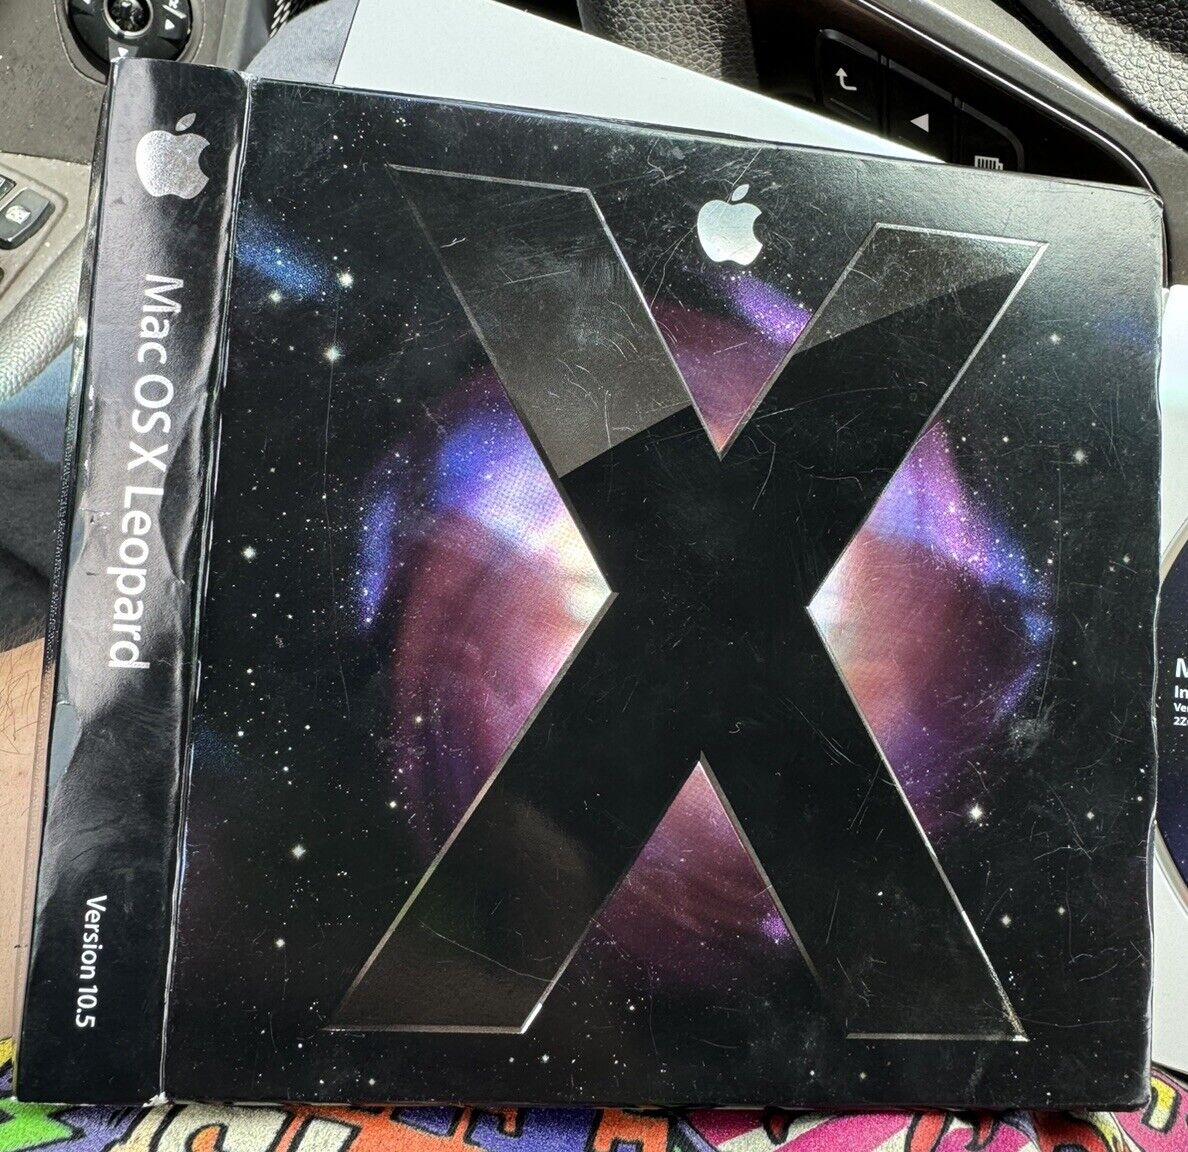 Apple Mac OS X Leopard Version 10.5 Install DVD Disc with Manual CIB Complete